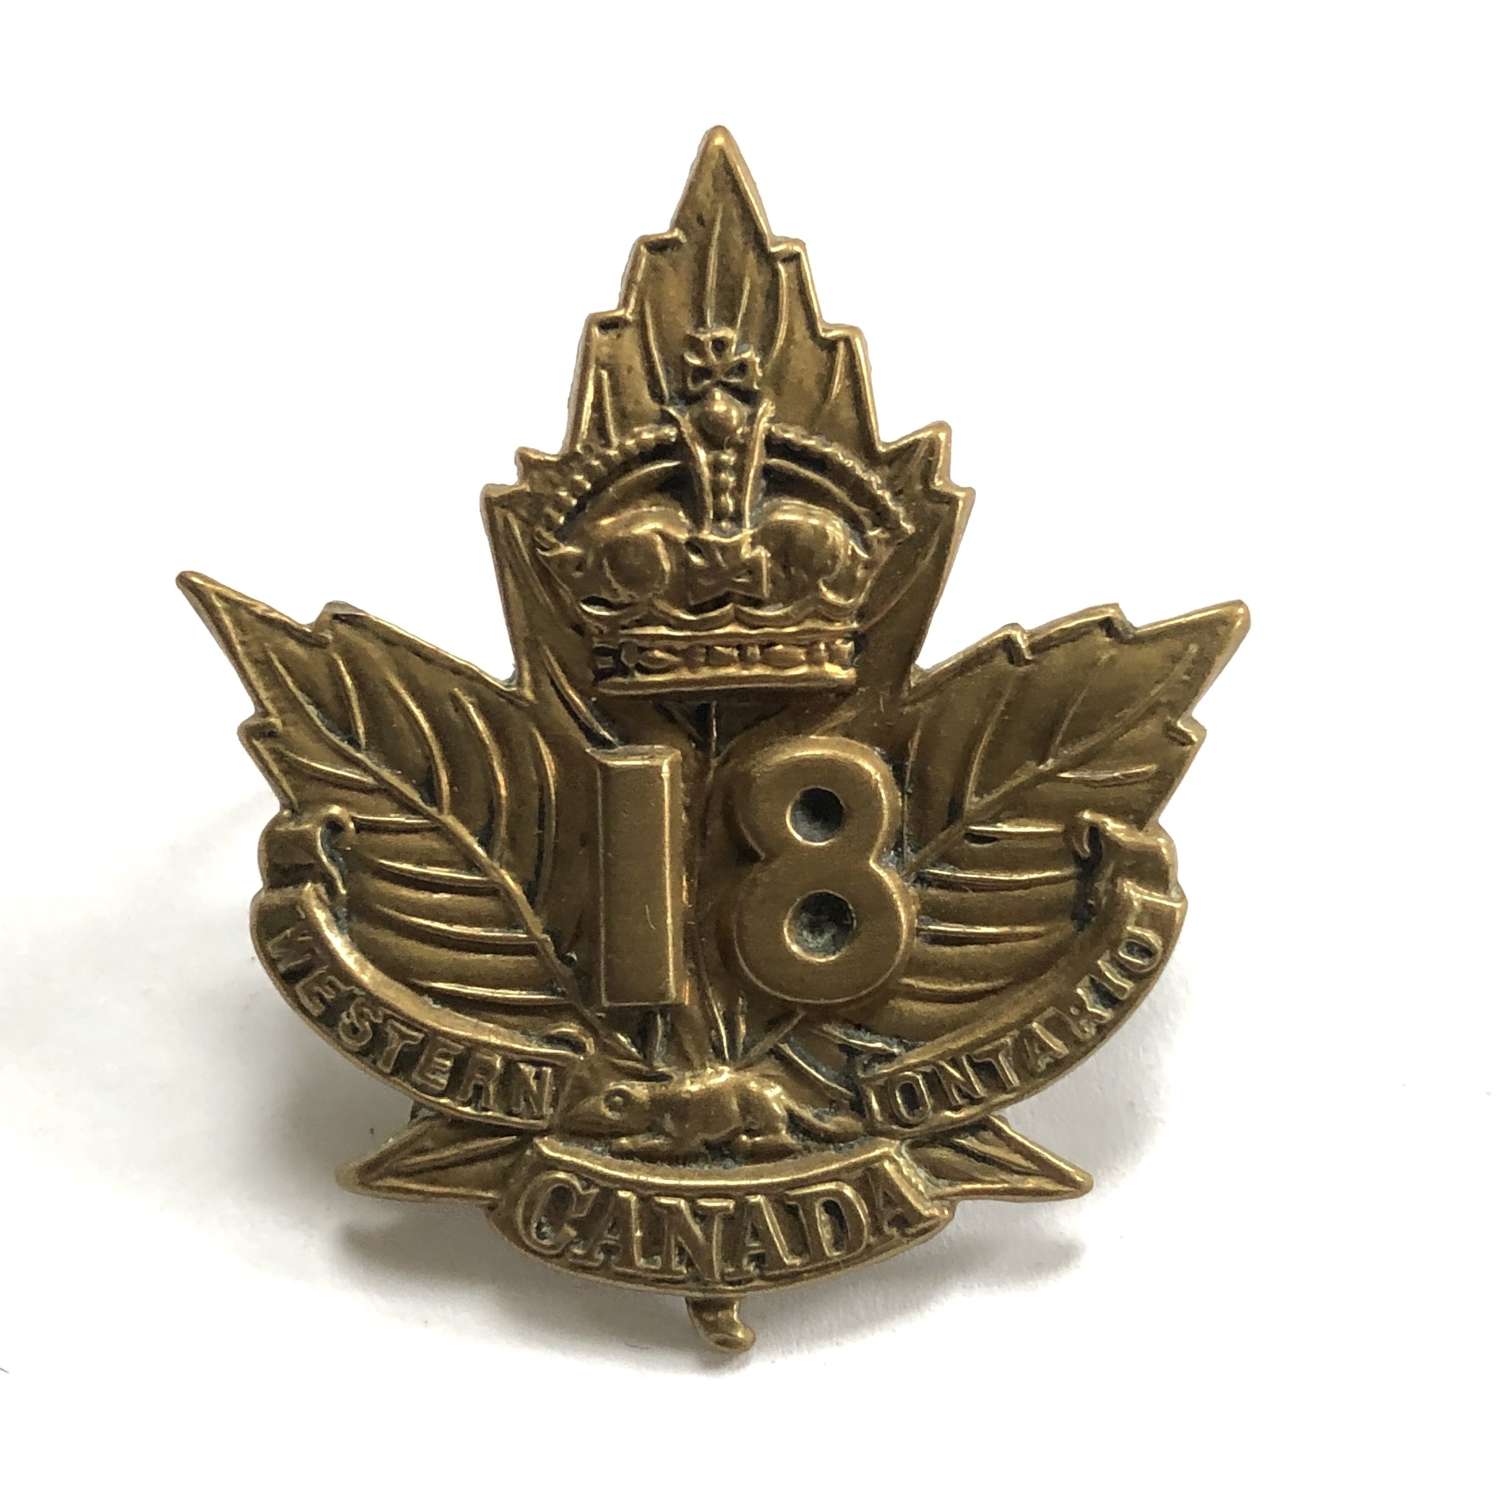 Canadian 18th Bn. CEF cap badge by Tiptaft